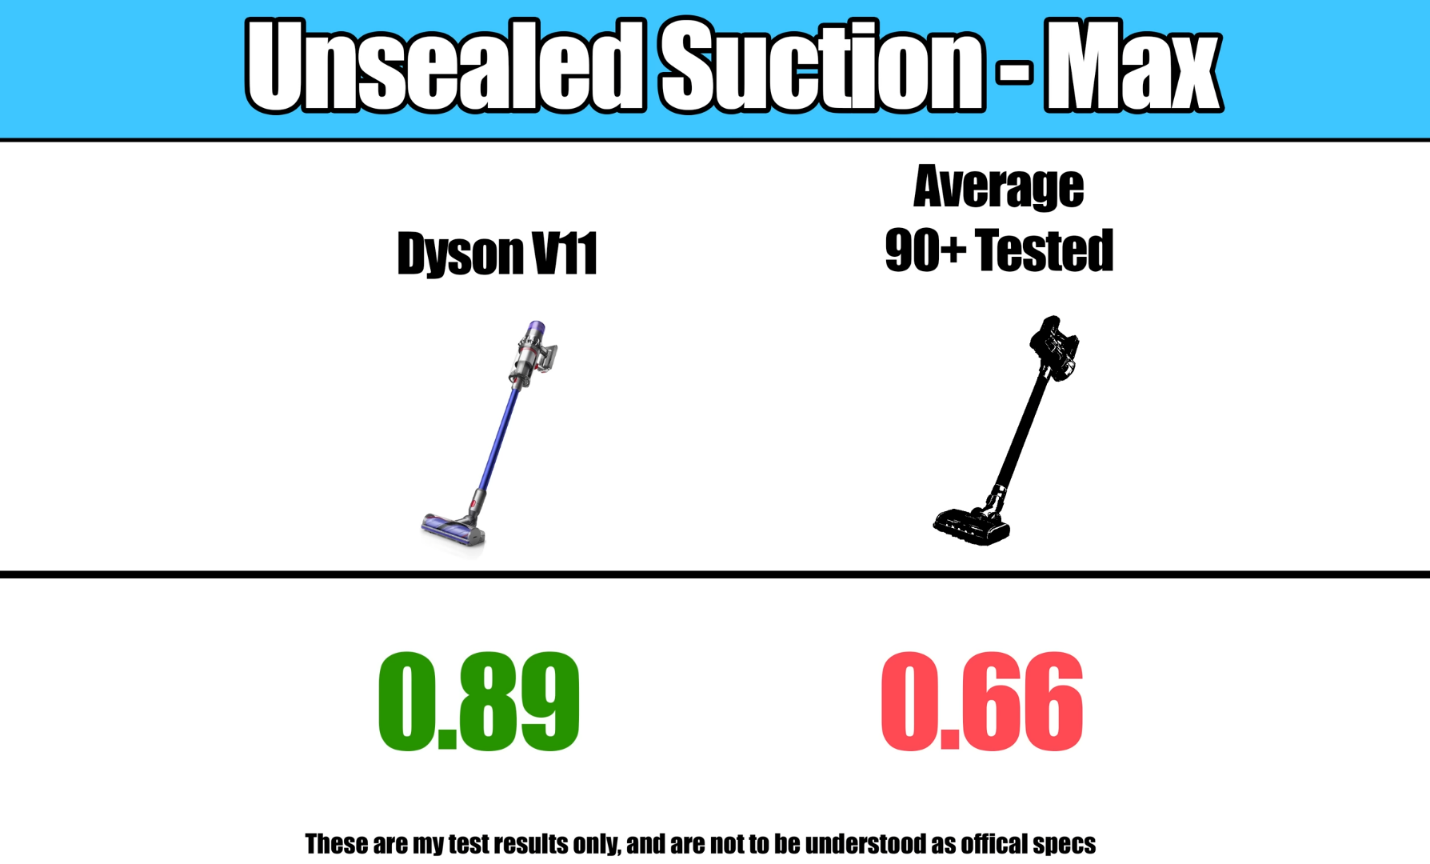 Comparing the Dyson V11's unsealed suction score of 0.89 to the average of 0.66 from 90+ evaluated vacuums.